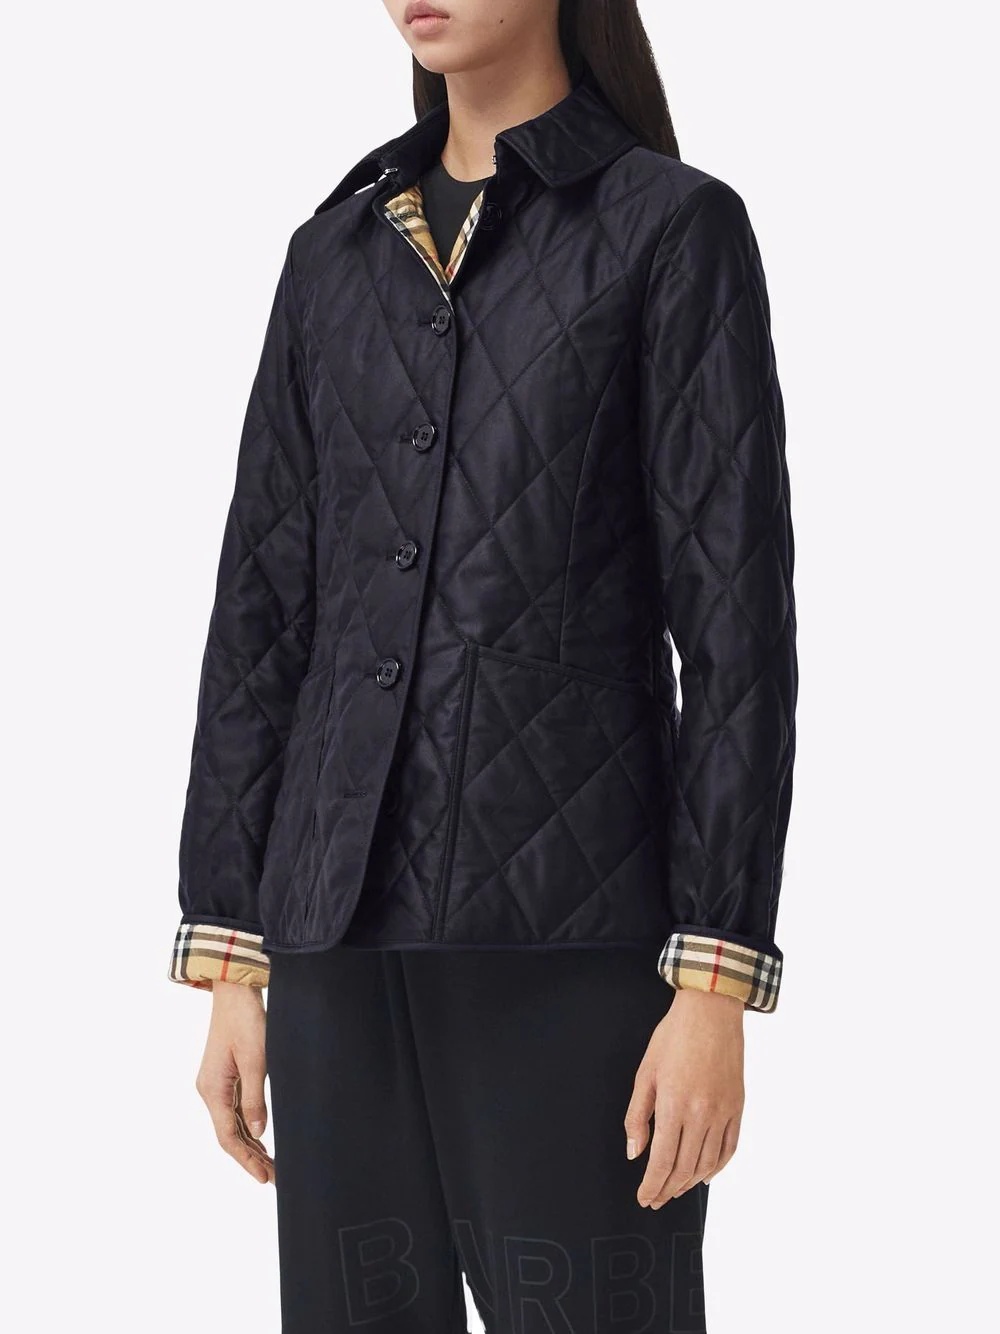 diamond-quilted thermoregulated jacket - 3